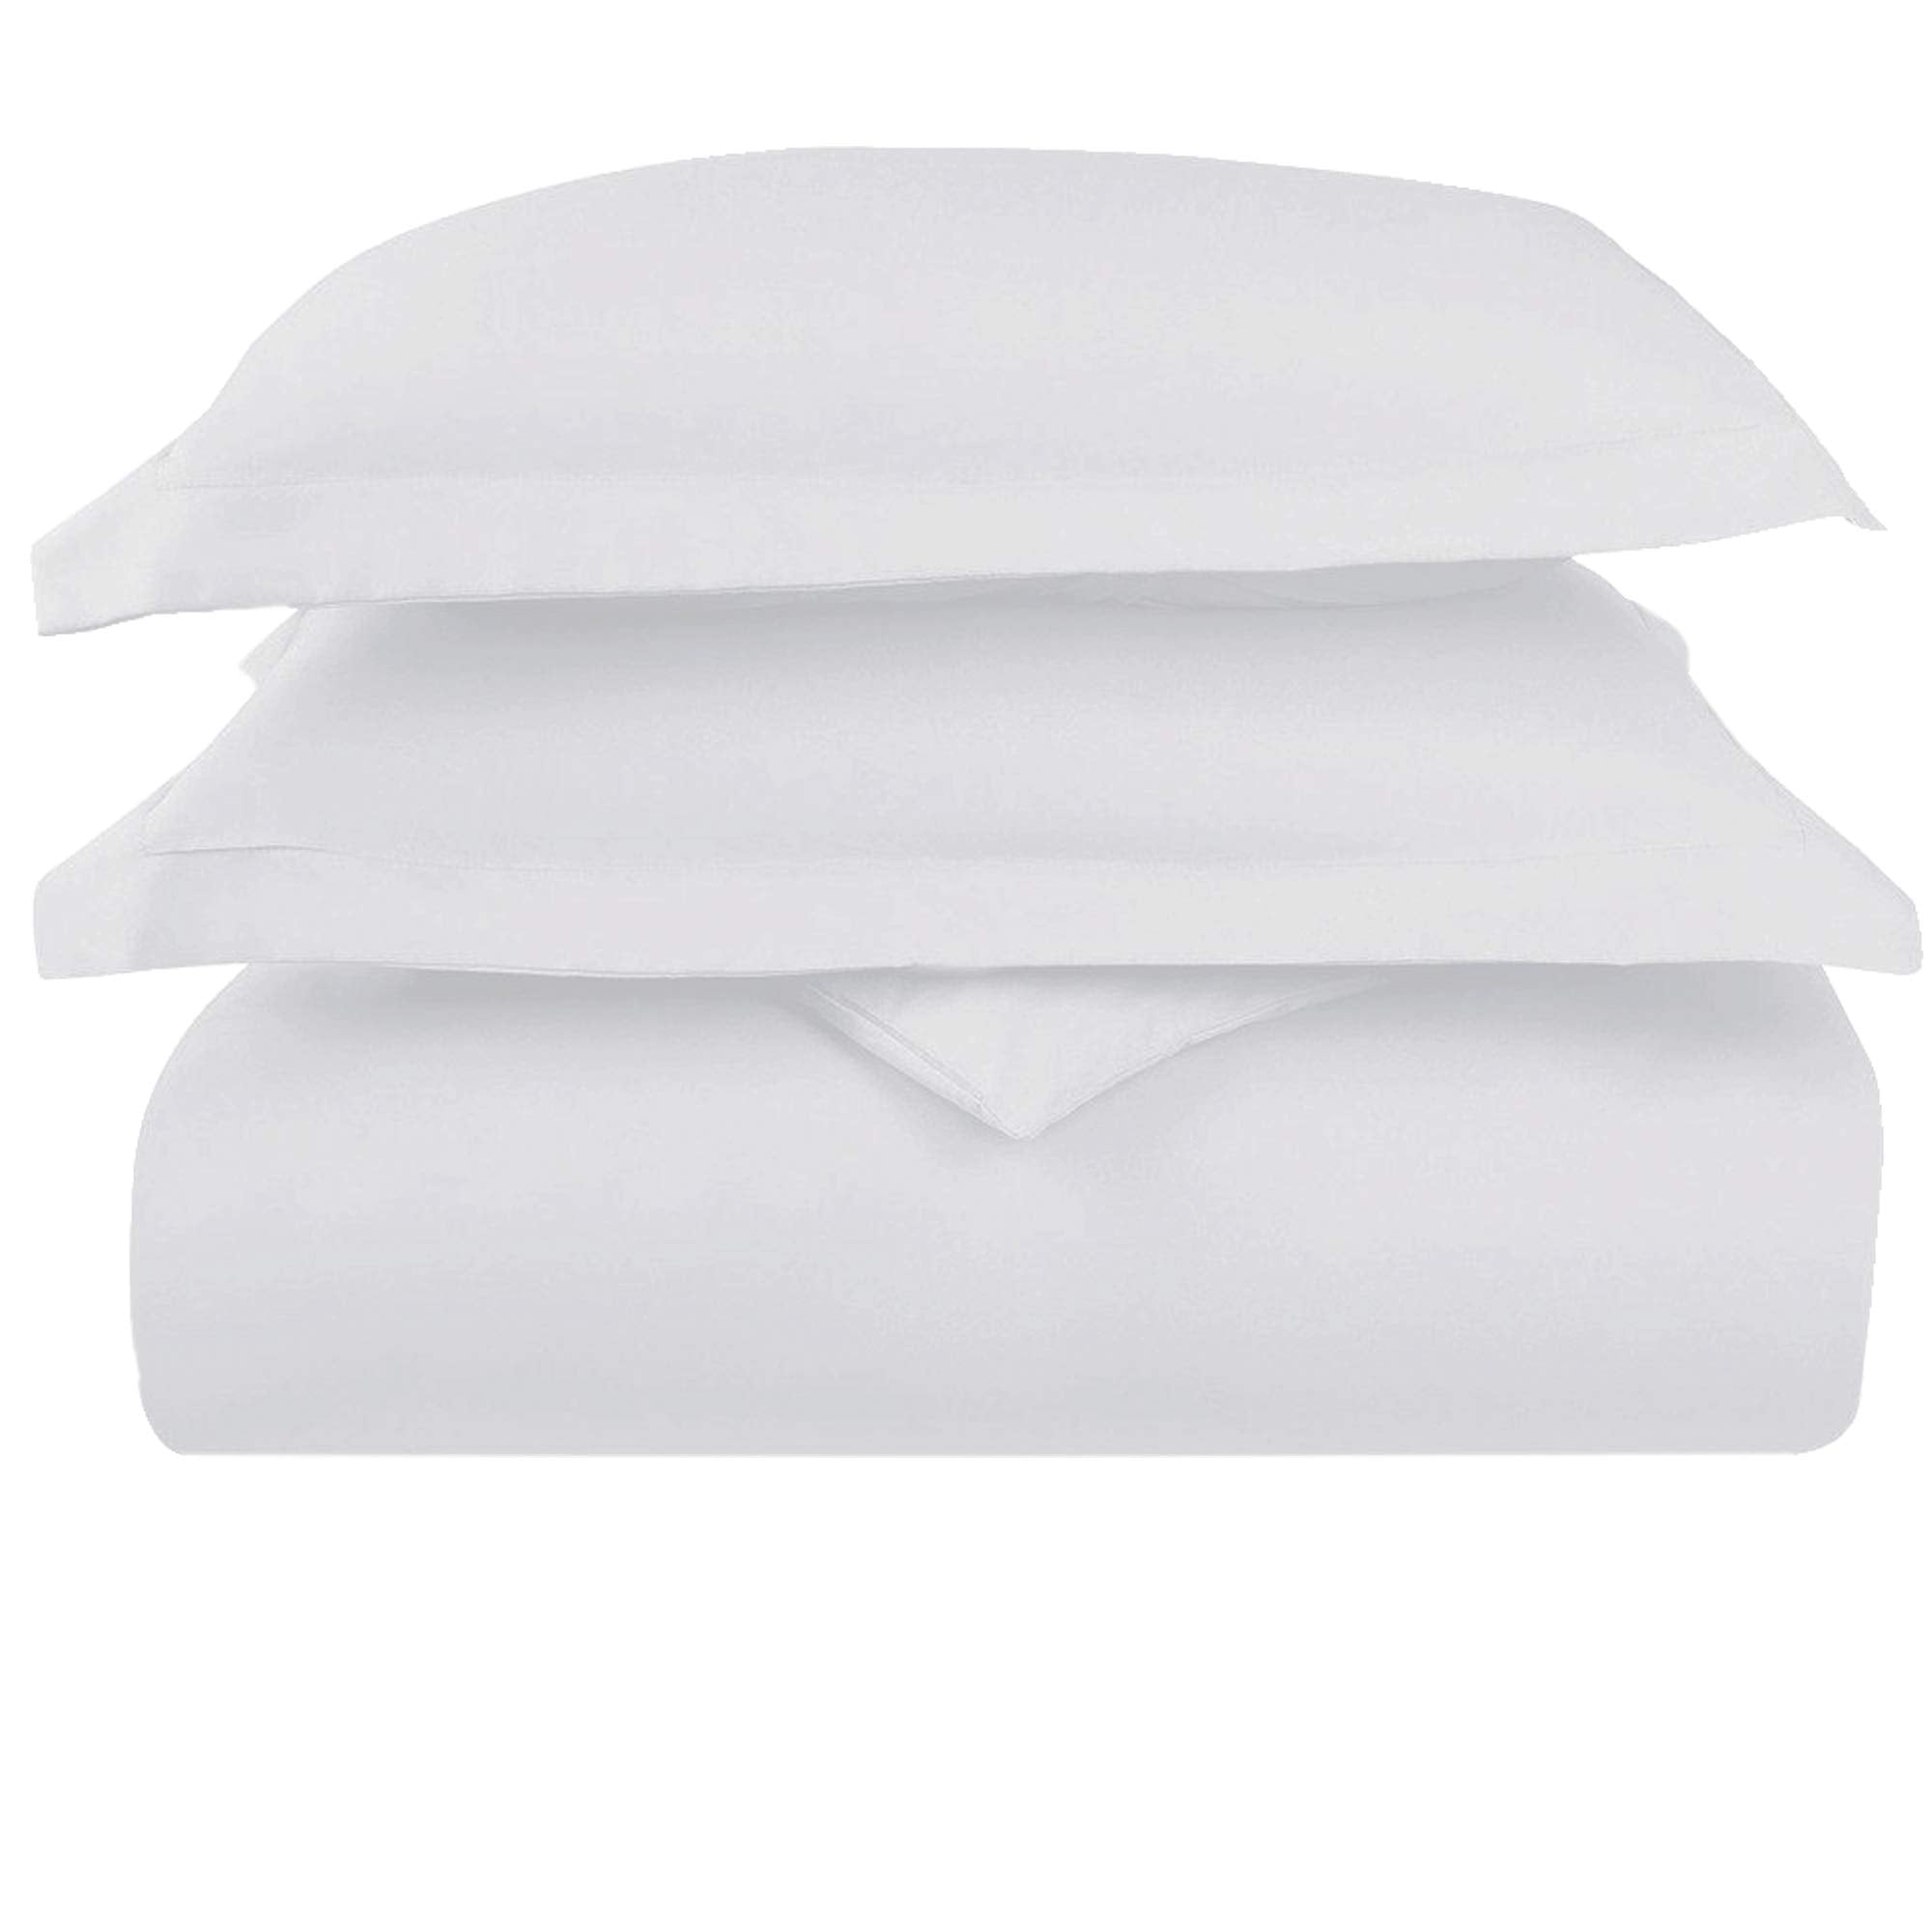 Pizuna 600 Thread Count Cotton King-Size-Duvet-Cover-Set, Bright White 100% Long Staple Cotton White-Bedding King, Soft Sateen Weave 4 Corner Ties and Hidden Button Closure (Cotton Quilt Cover)